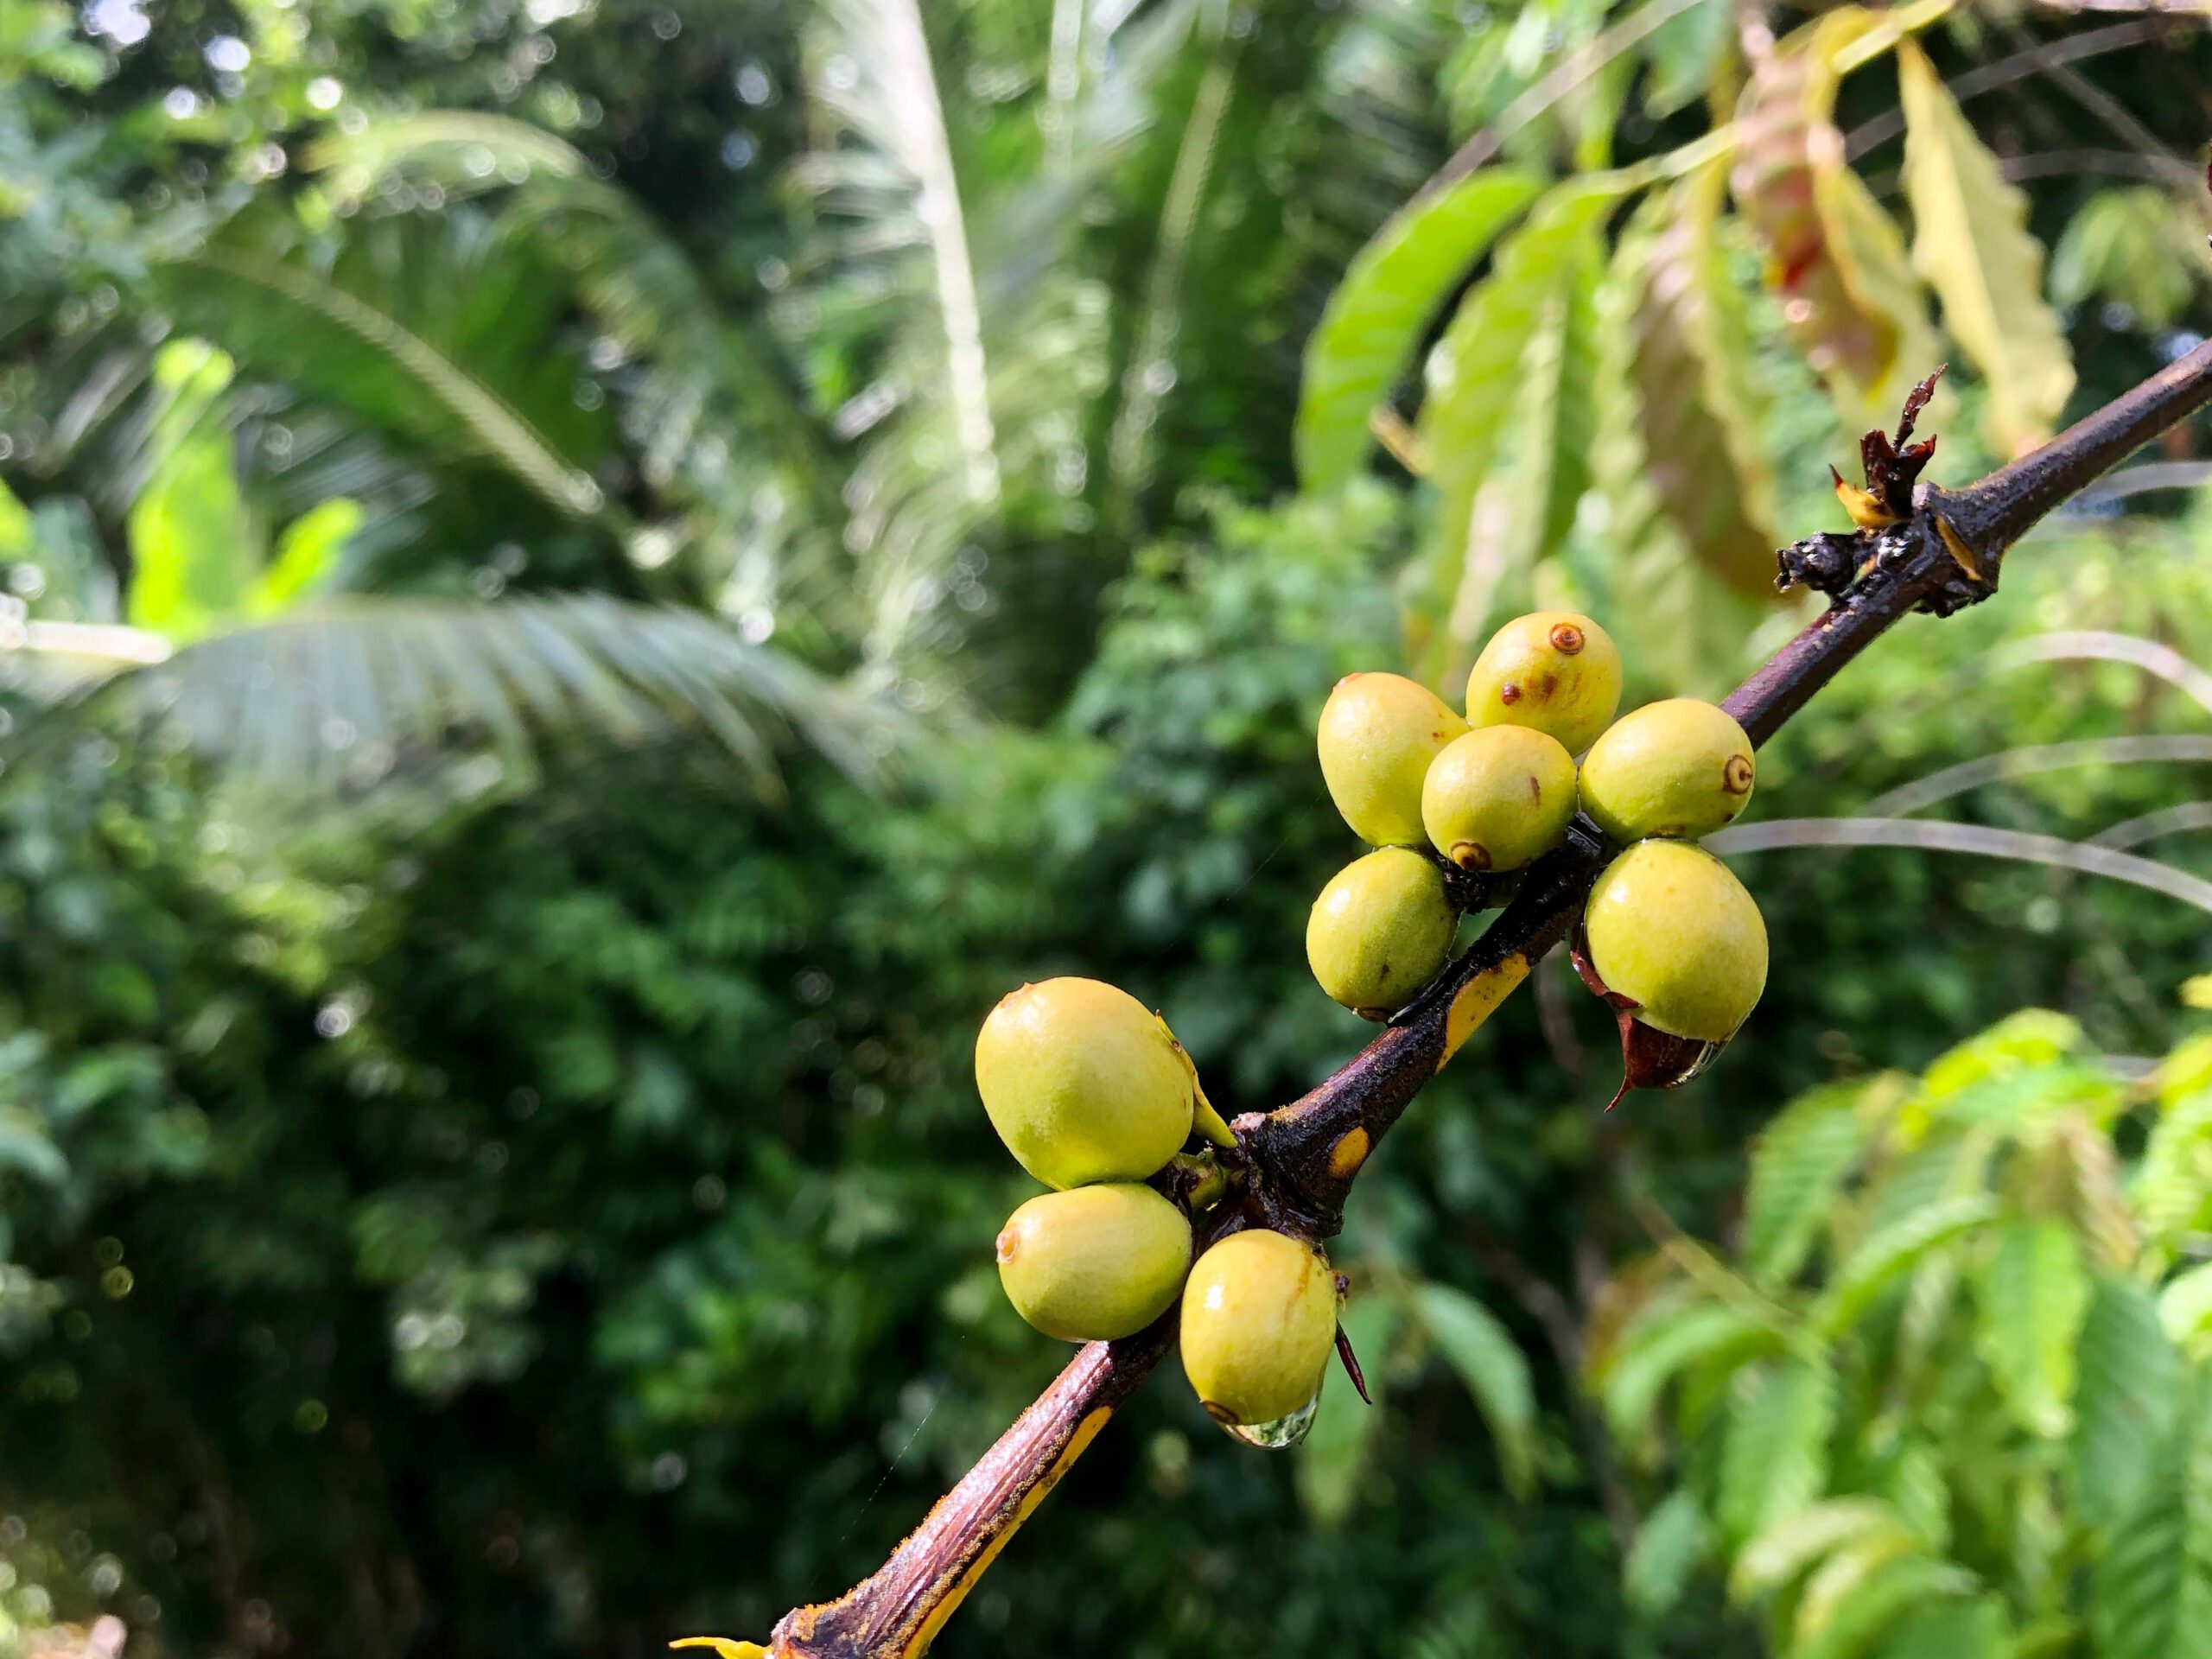 Coffee grows in the garden